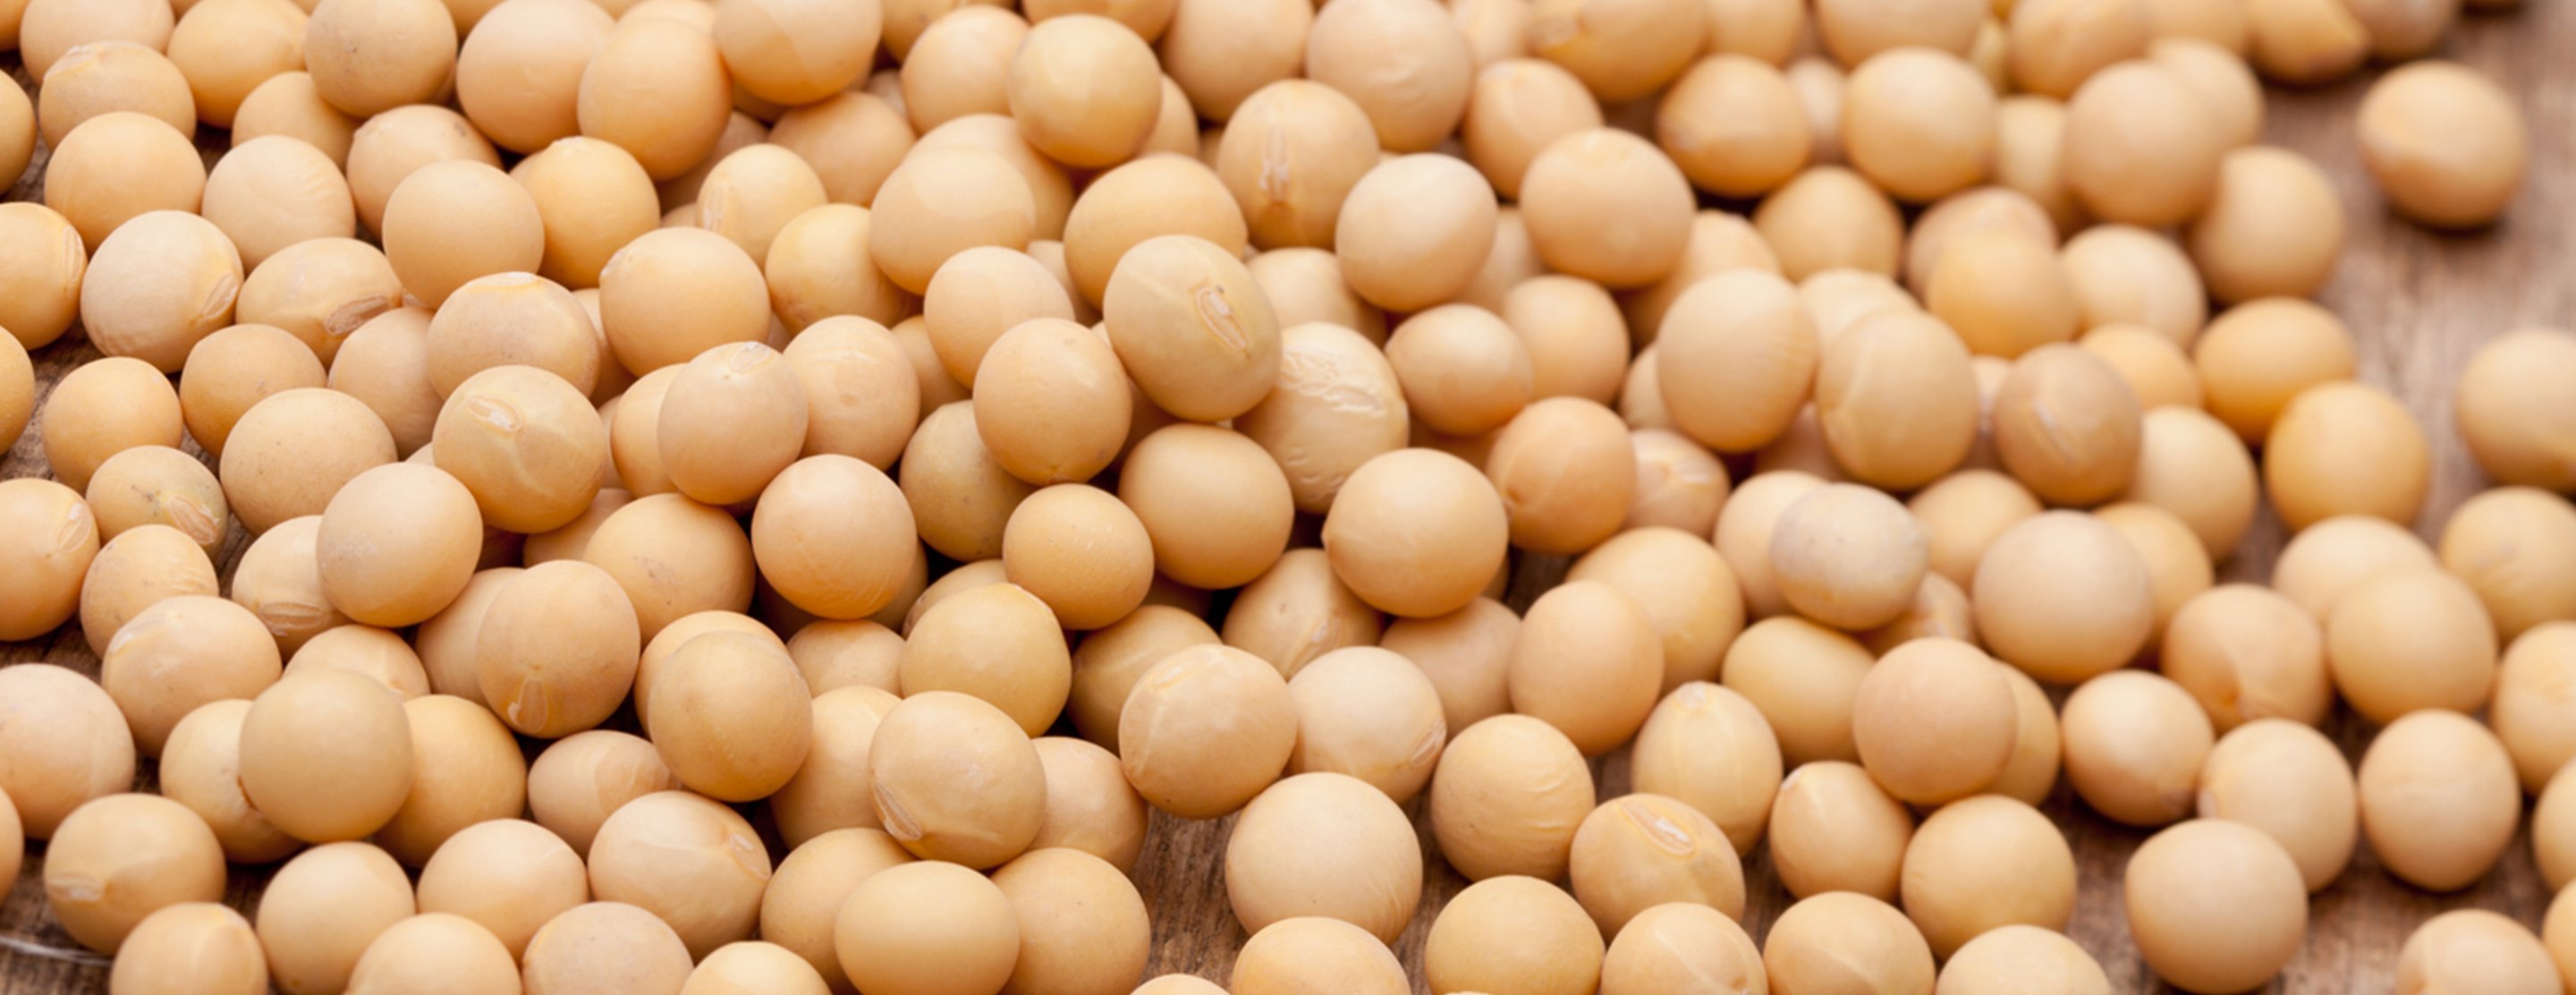 Soy protein early in life may help prevent bone loss in 